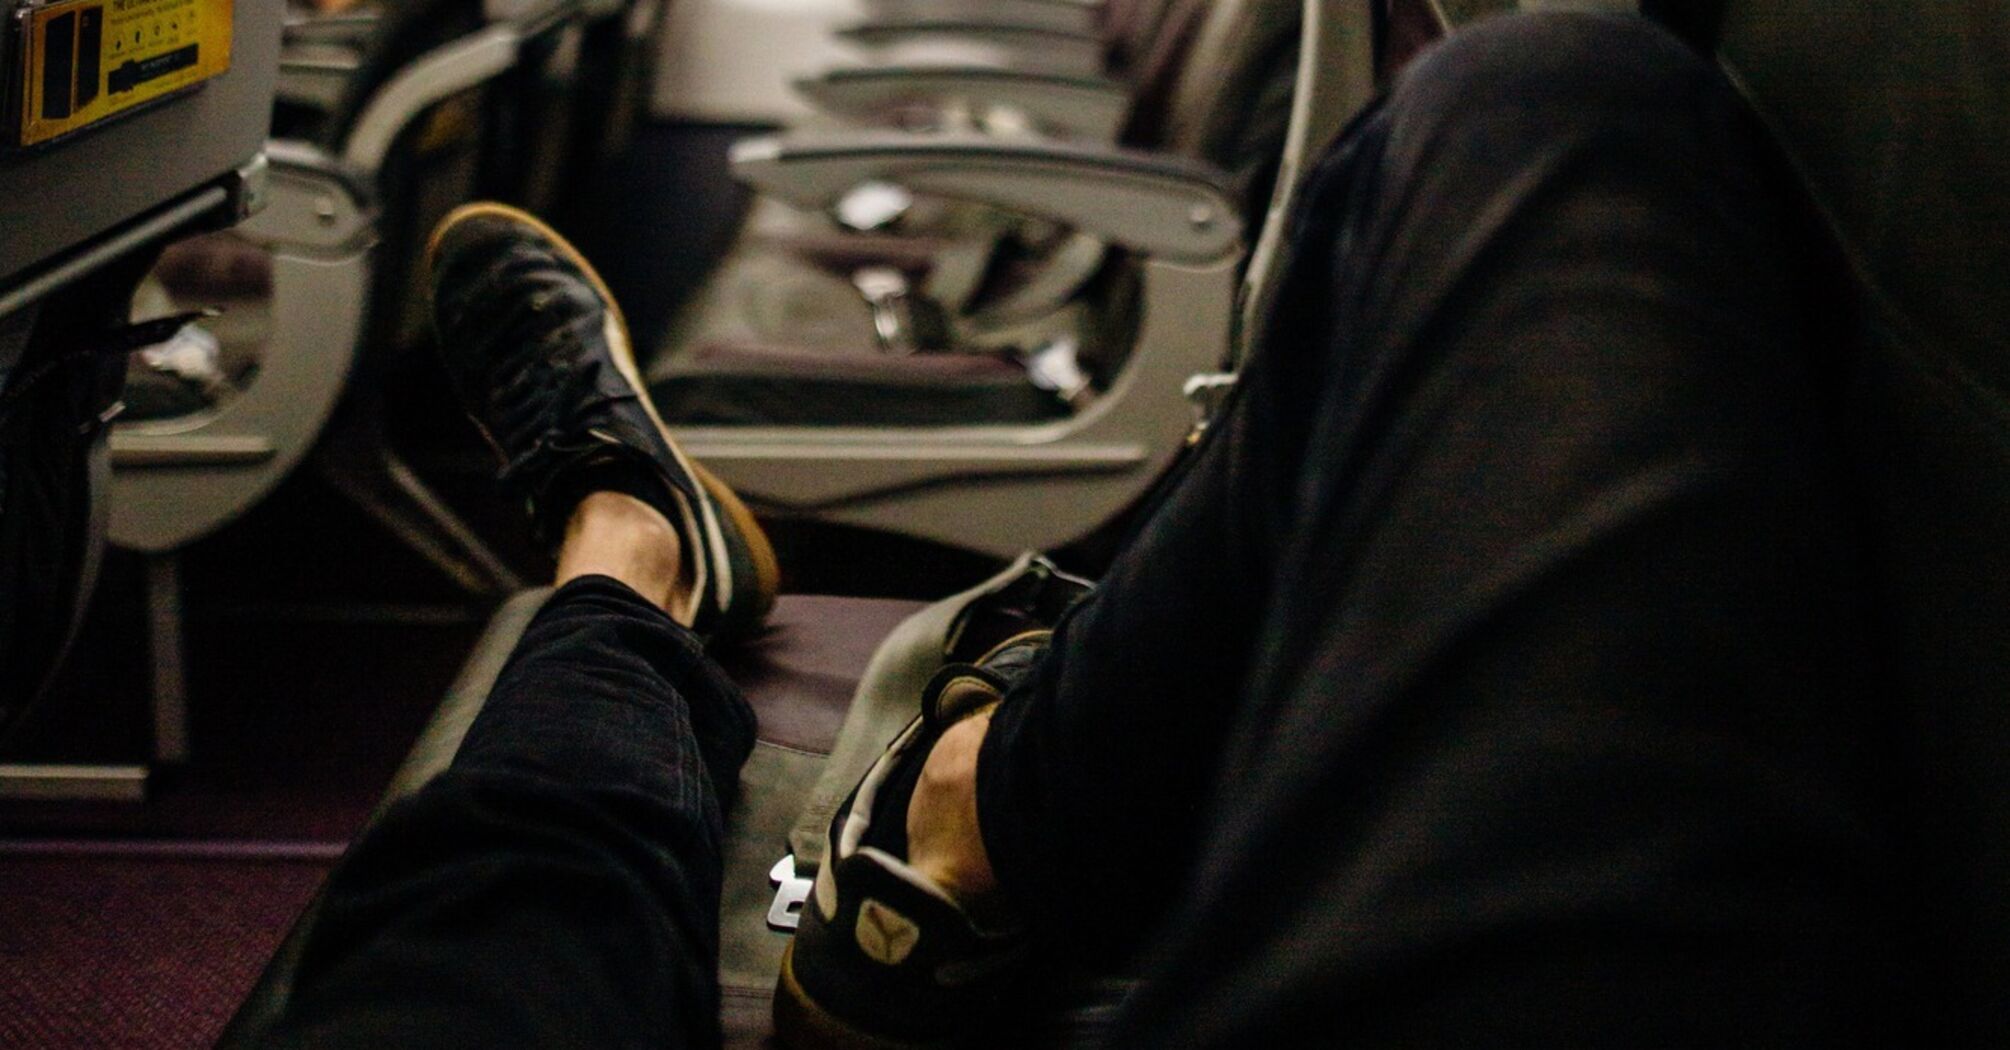 What to do if your neighbor's feet invade your space on an airplane: advice from an etiquette expert